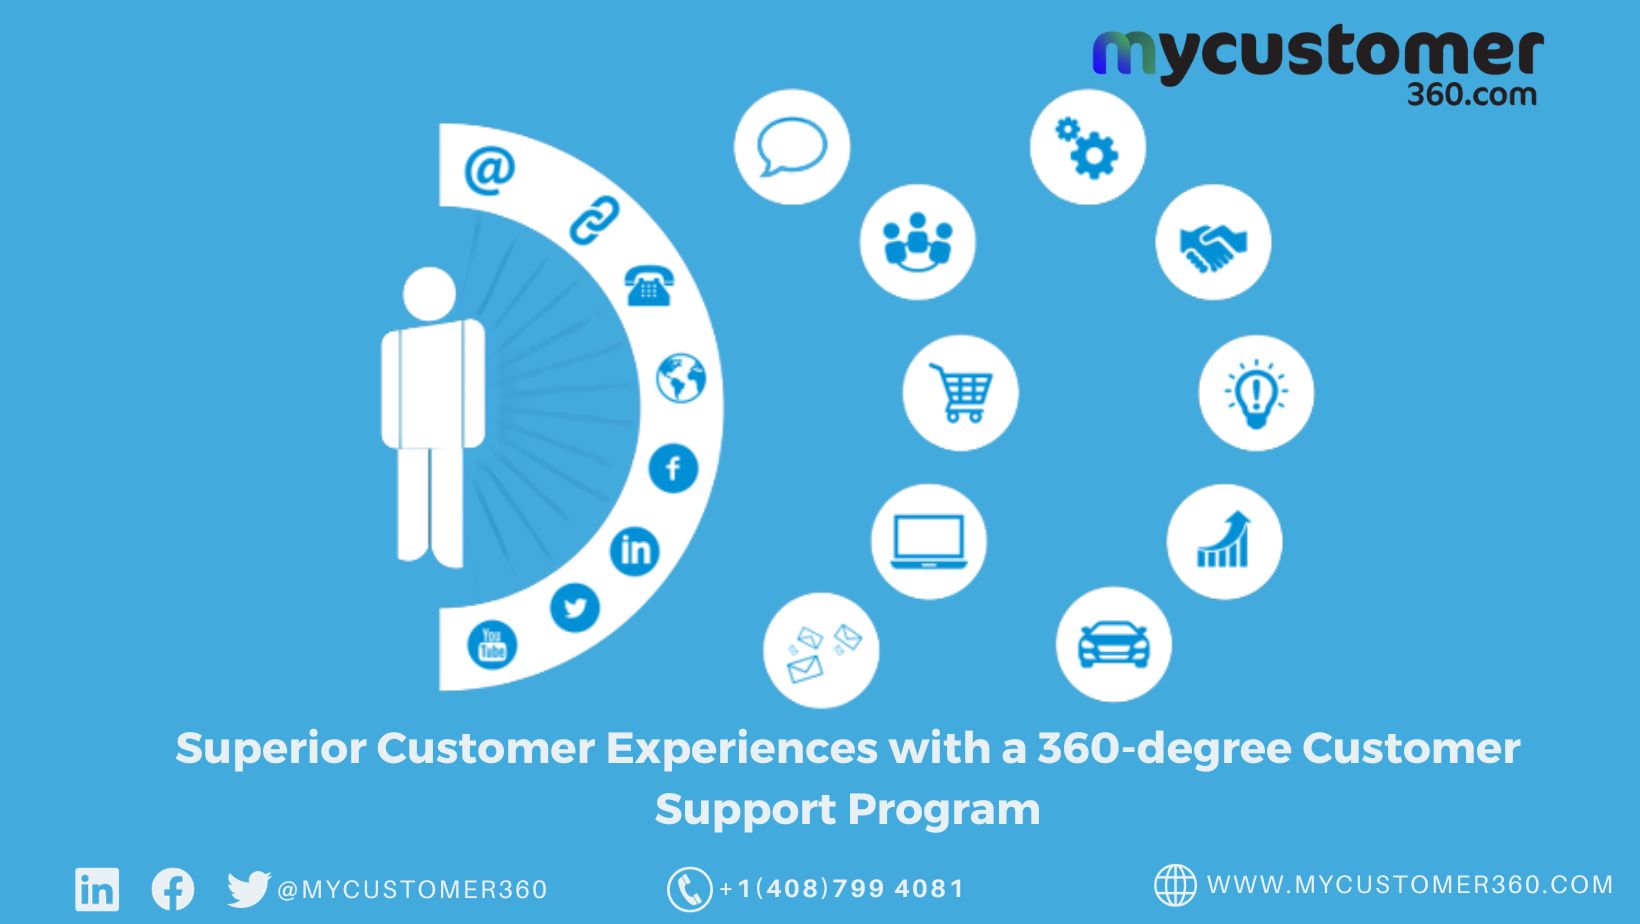 Deliver Superior Customer Experiences with a 360-degree Customer Support Program